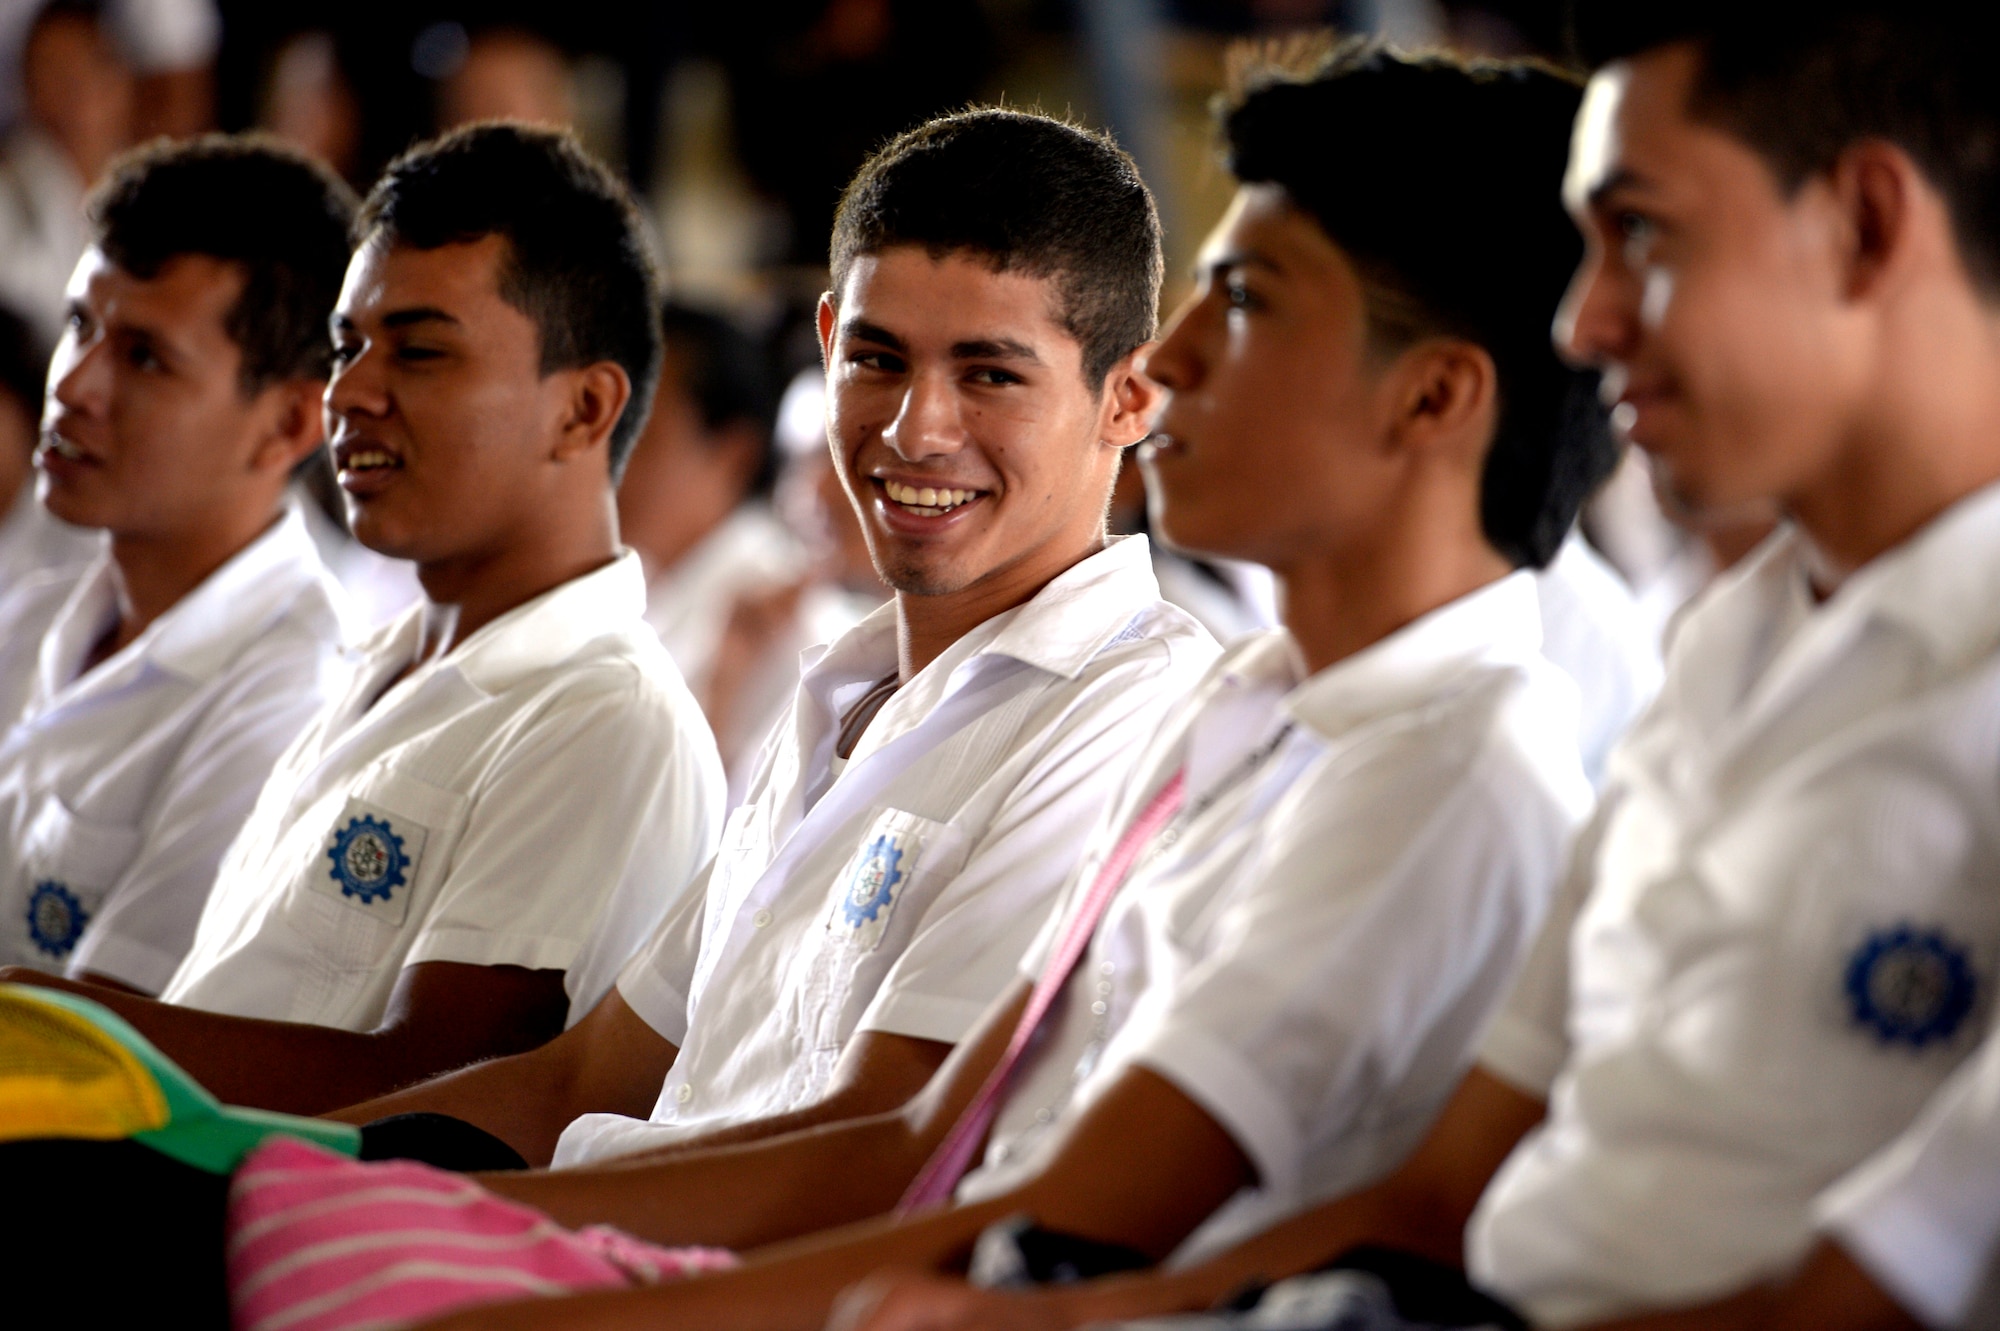 Froylan Turcios Industrial Technical Institute students attend a class about malaria, chikungunya and other prevalent mosquito transmitted diseases throughout Honduras at their school in Tocoa, Honduras, June 23, 2015. The class was organized by the Tocoa-based vector-borne disease surveillance team and is part of the NEW HORIZONS Honduras 2015 training exercise. NEW HORIZONS was launched in the 1980s and is an annual joint humanitarian assistance exercise that U.S. Southern Command conducts with a partner nation in Central America, South America or the Caribbean. The exercise improves joint training readiness of U.S. and partner nation civil engineers, medical professionals and support personnel through humanitarian assistance activities. (U.S. Air Force photo by Capt. David J. Murphy/Released)